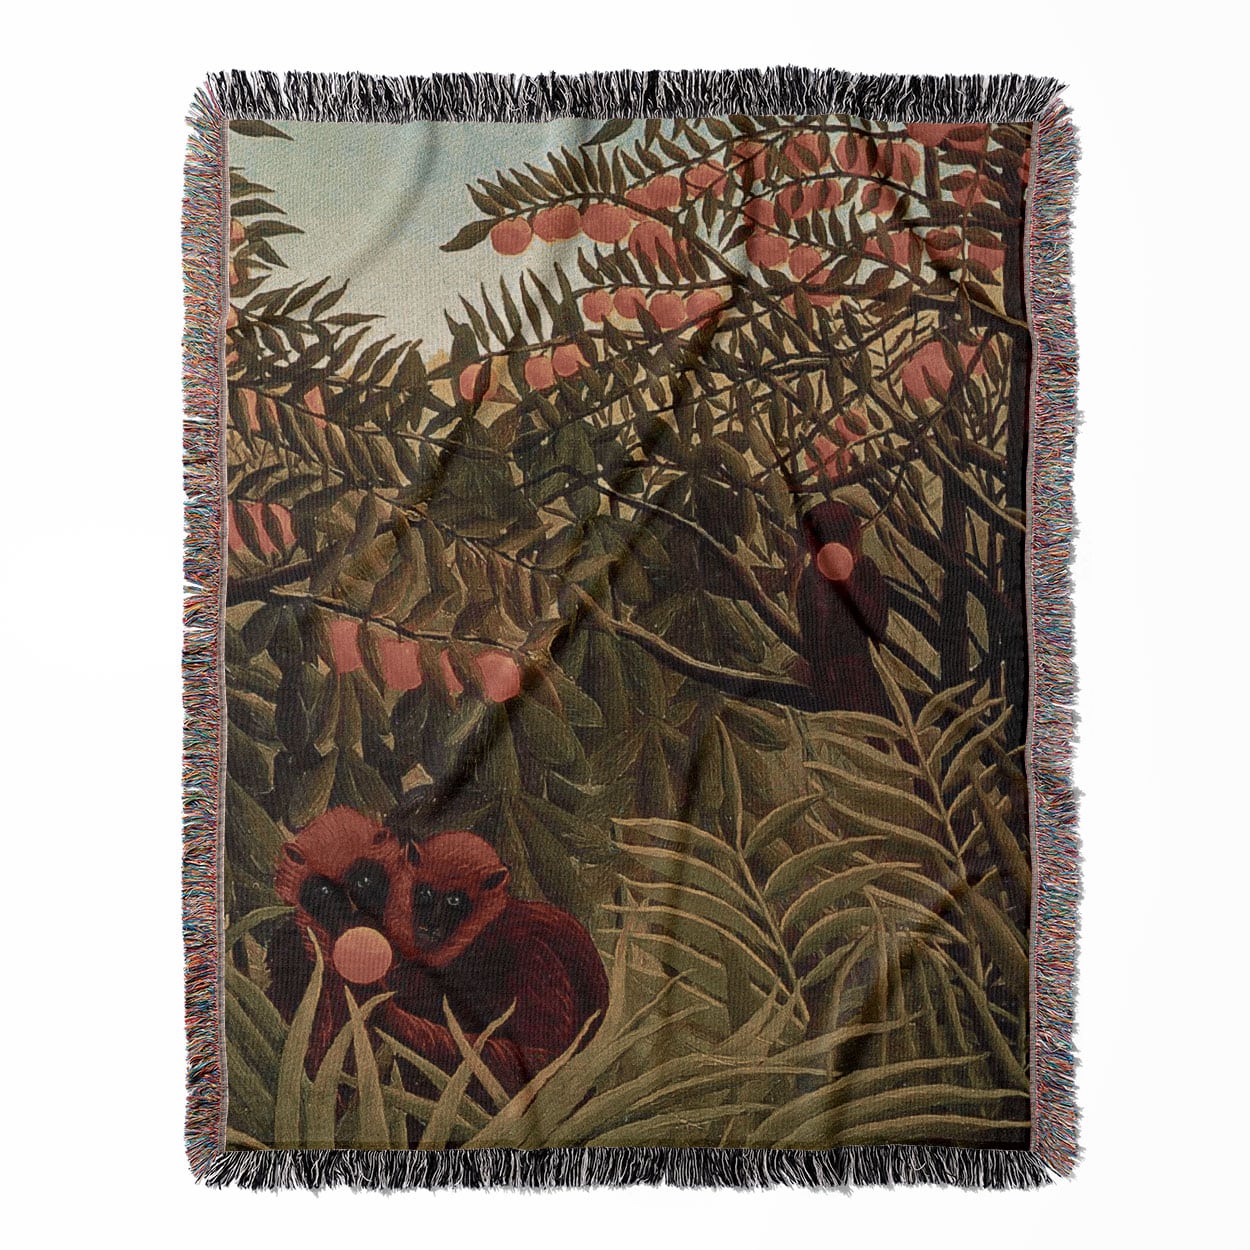 Vintage Tropical woven throw blanket, made of 100% cotton, featuring a soft and cozy texture with wild apes for home decor.